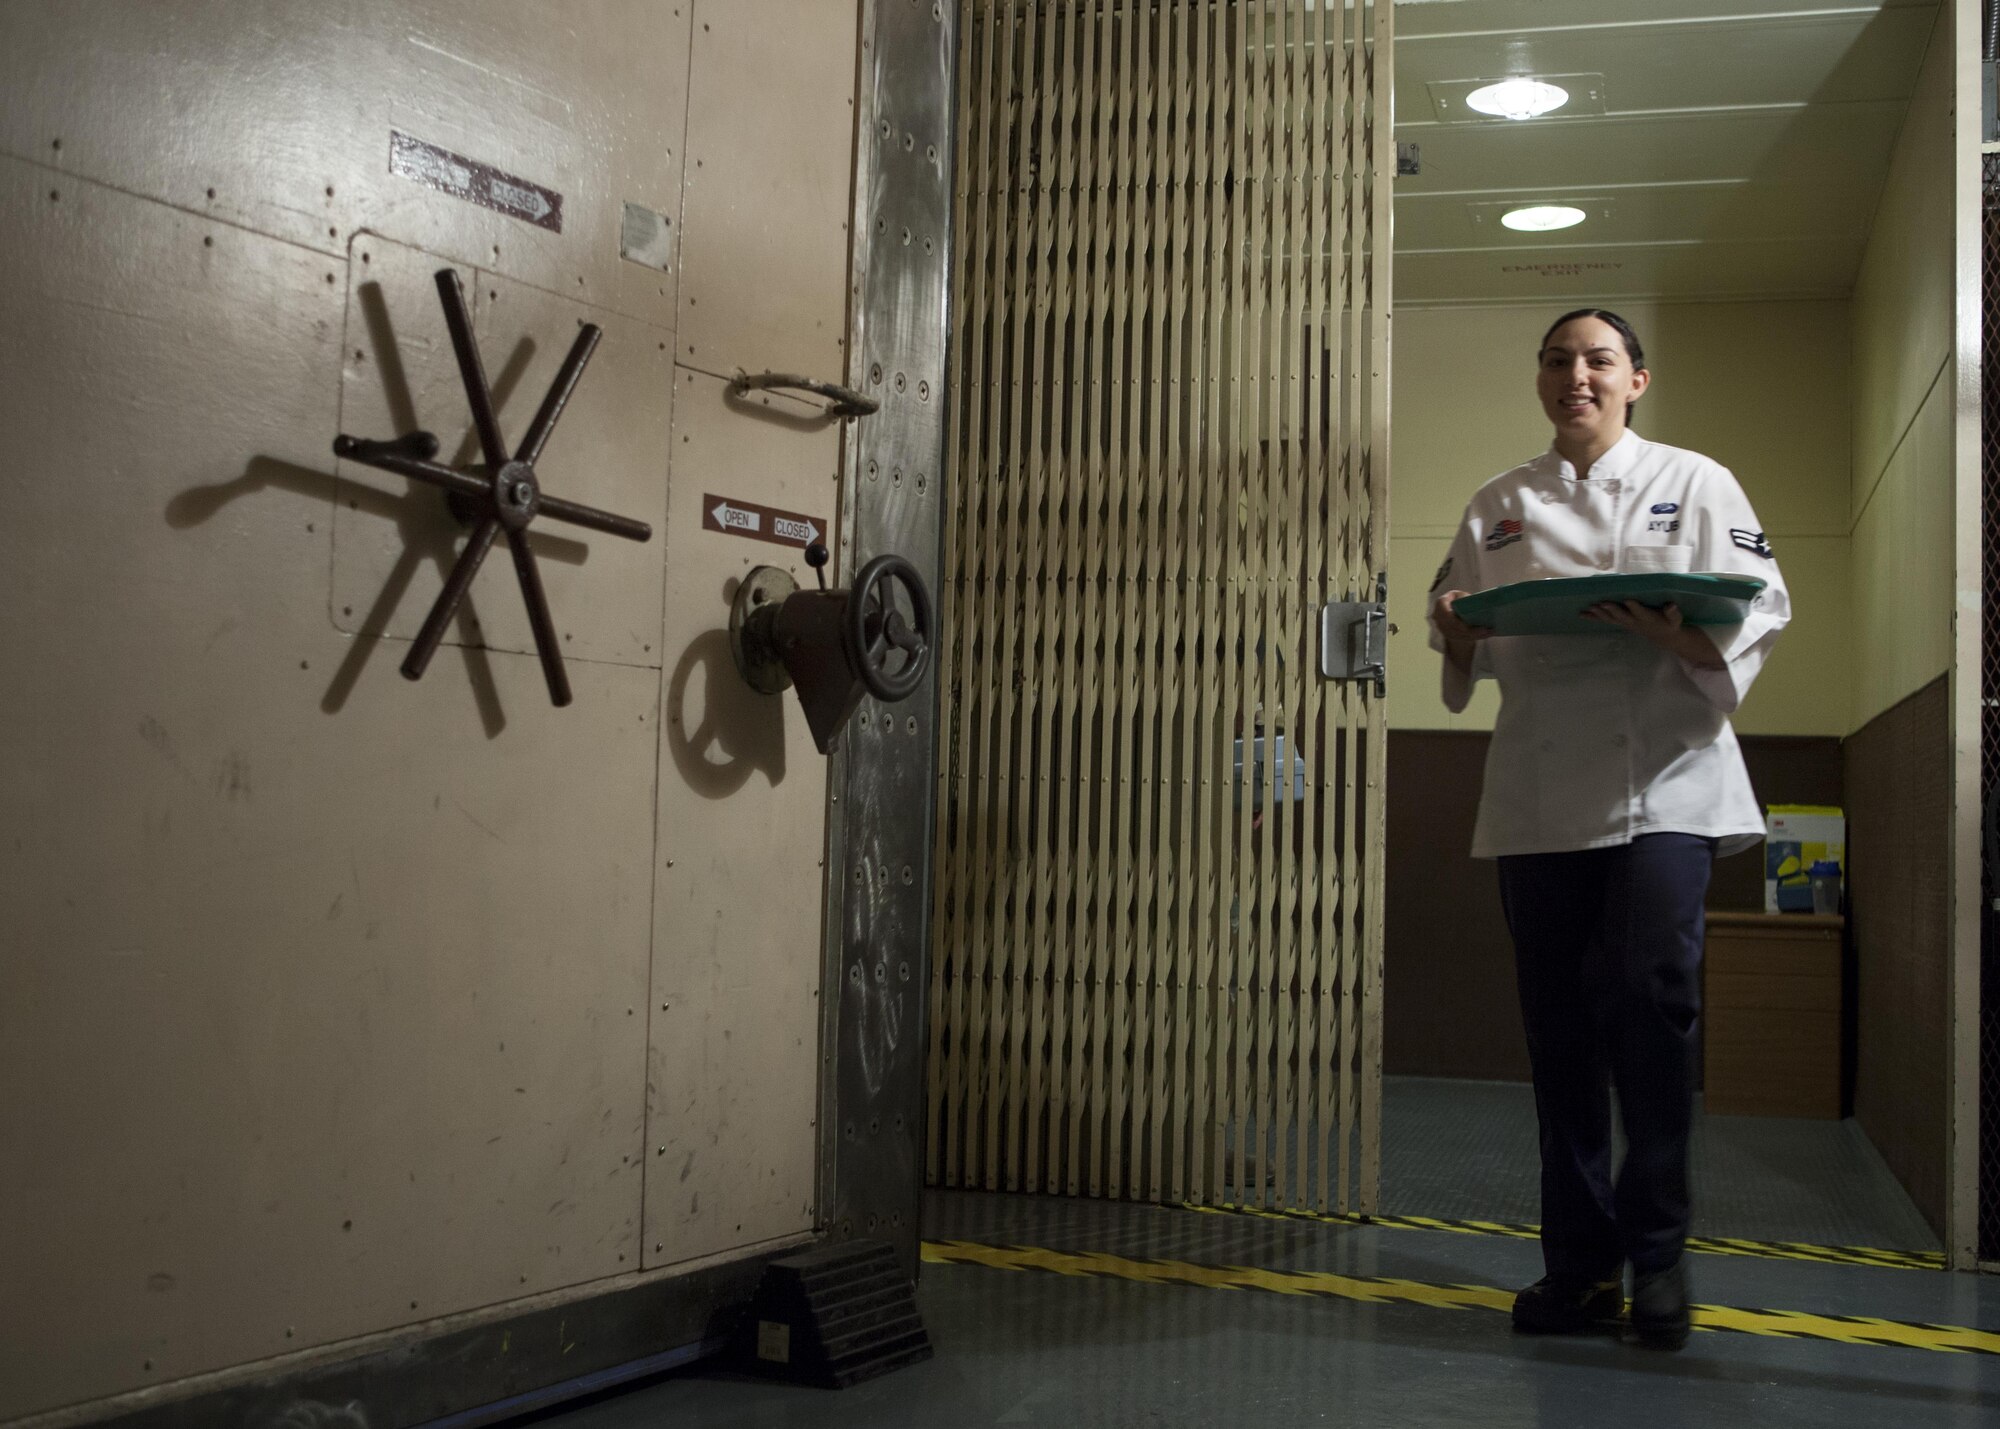 Airman 1st Class Alexandra Ayub, 90th Force Support Squadron missile chef, F.E. Warren Air Force Base, Wyo., exits the elevator leading to the underground launch control center at a missile alert facility in the 90th Missile Wing Missile Complex May 17, 2016. Missile chefs are the chiefs of morale at each MAF, and a large part of their efforts to that end are fueled by providing Airmen on site nutritious, tasty meals. (U.S. Air Force photo by Lan Kim)